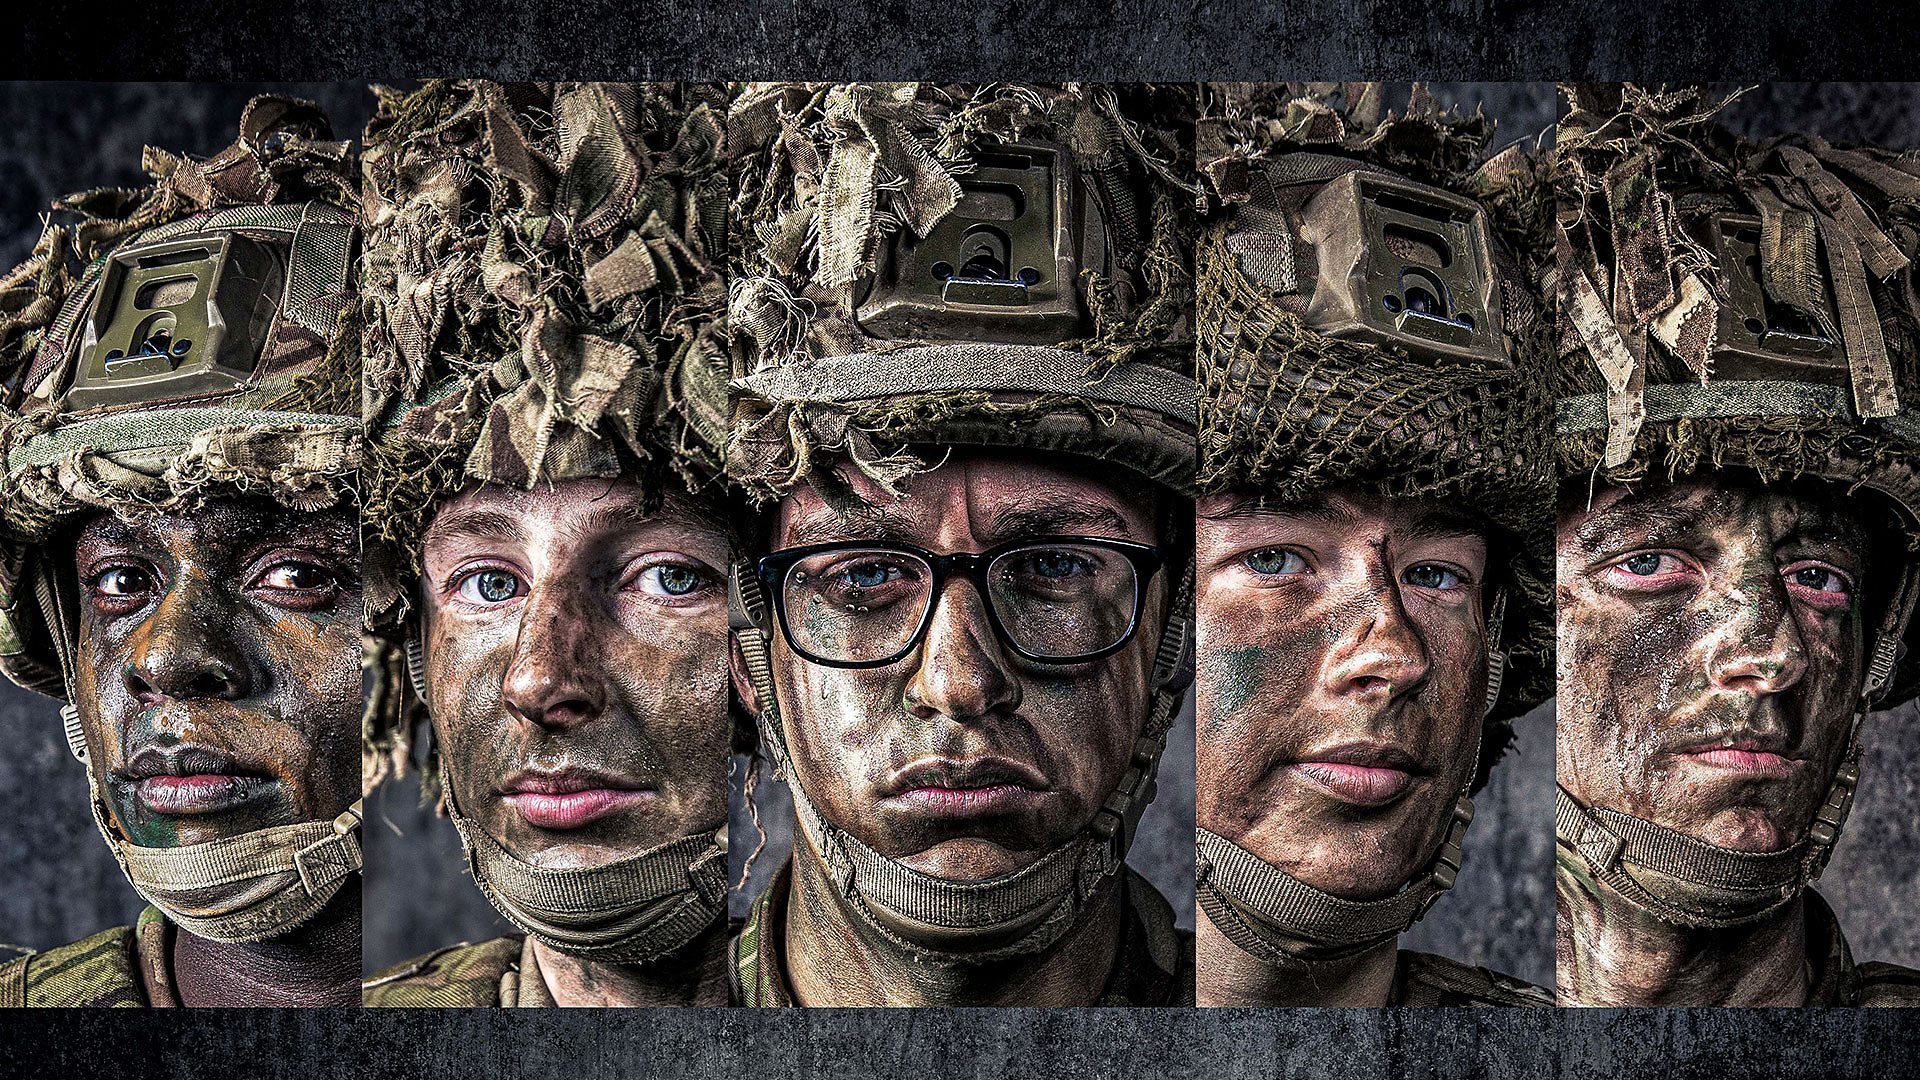 Soldier - Meet the recruits and team training them for life on the